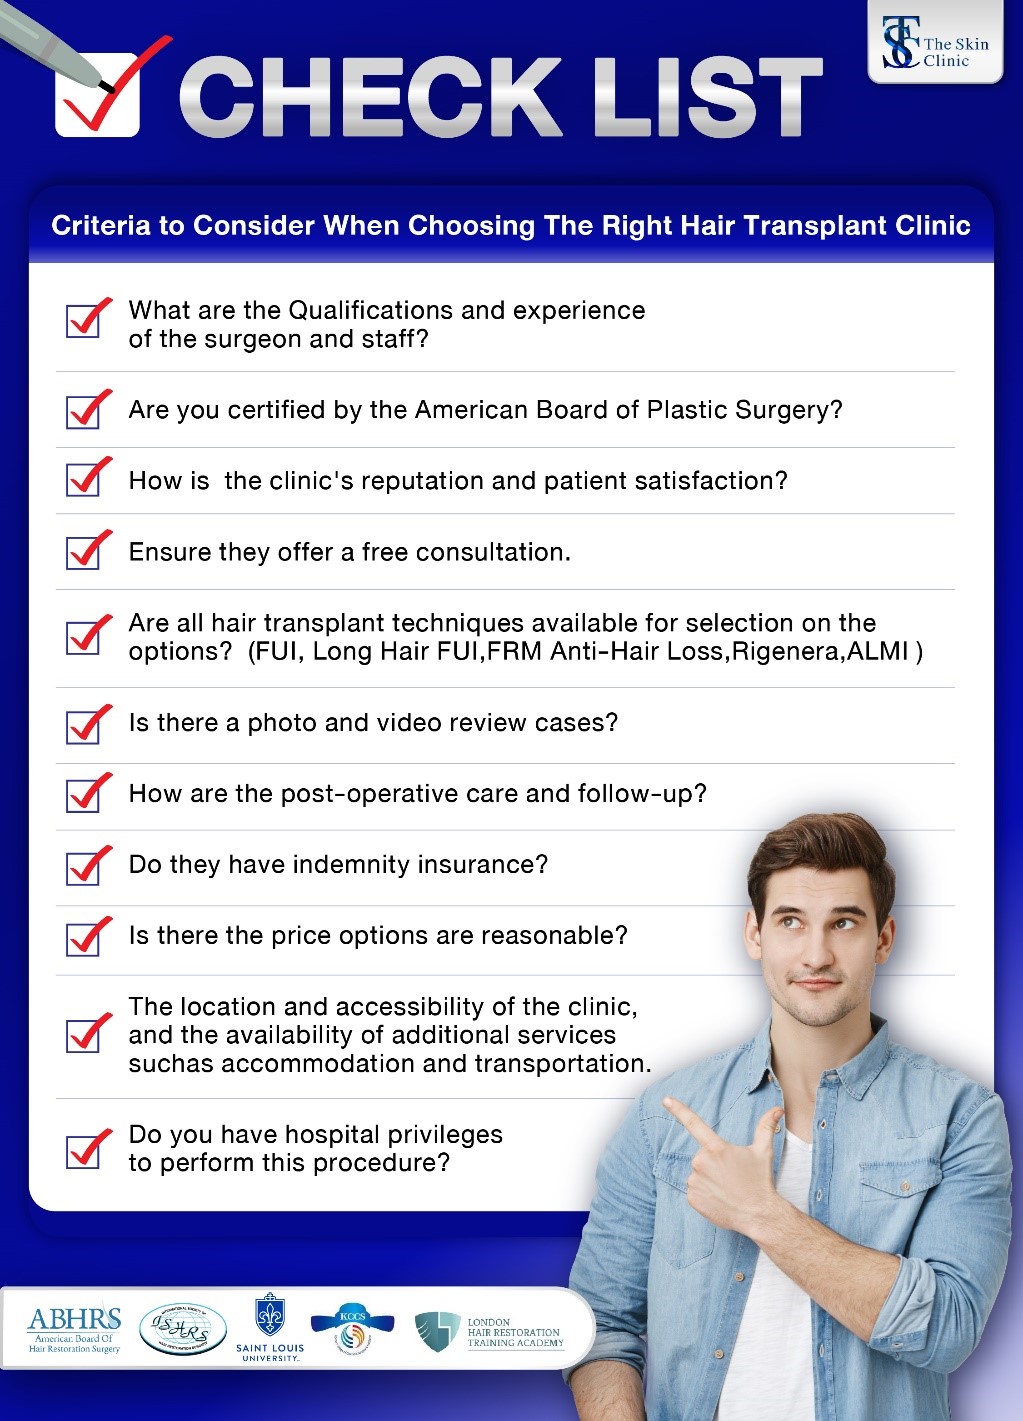 Criteria to Consider When Choosing the Right Hair Transplant Clinic?